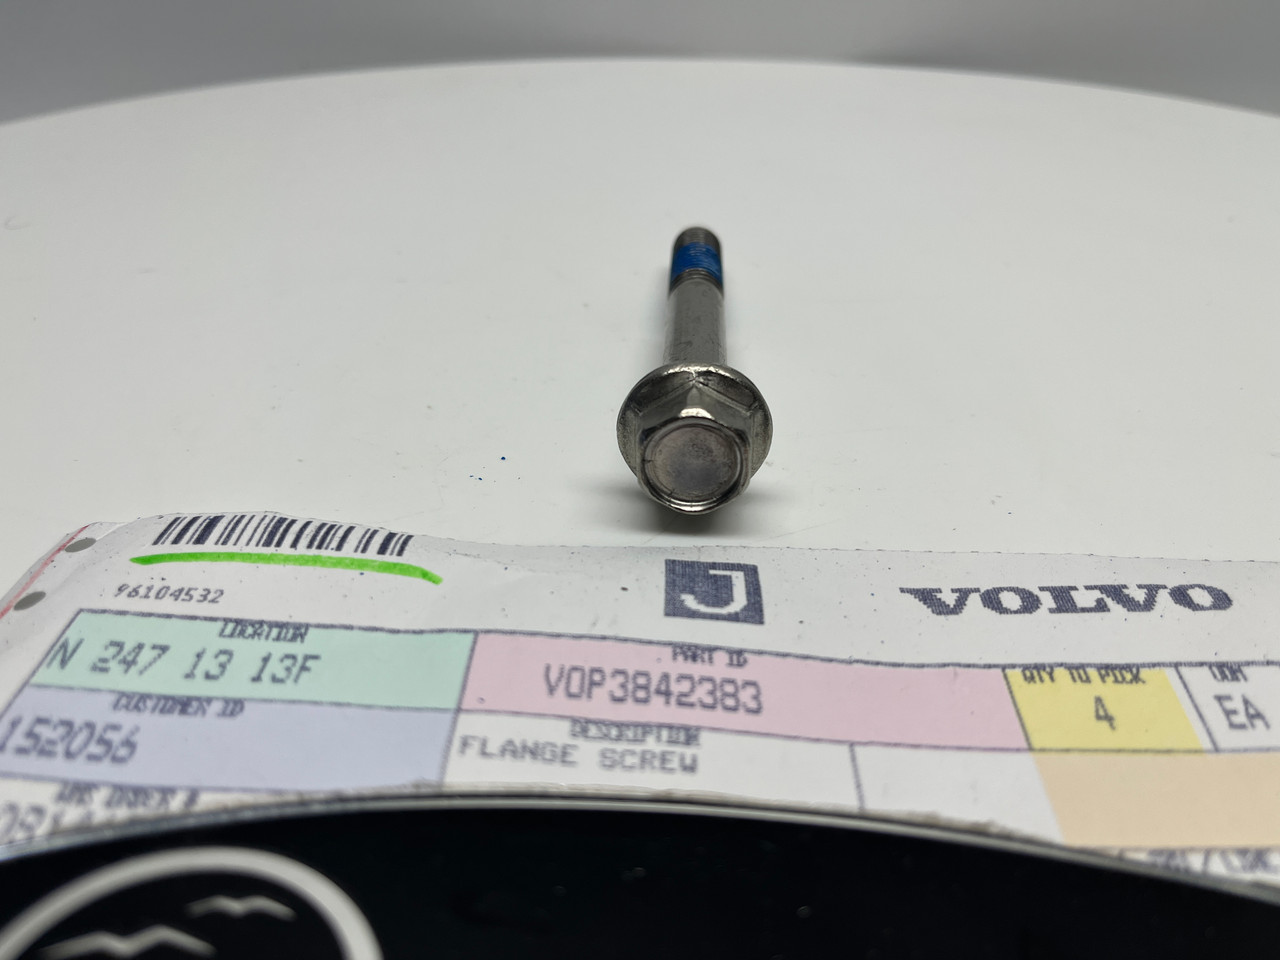 $16.99* GENUINE VOLVO  no tax* FLANGE SCREW 3842383 *In Stock & Ready To Ship!